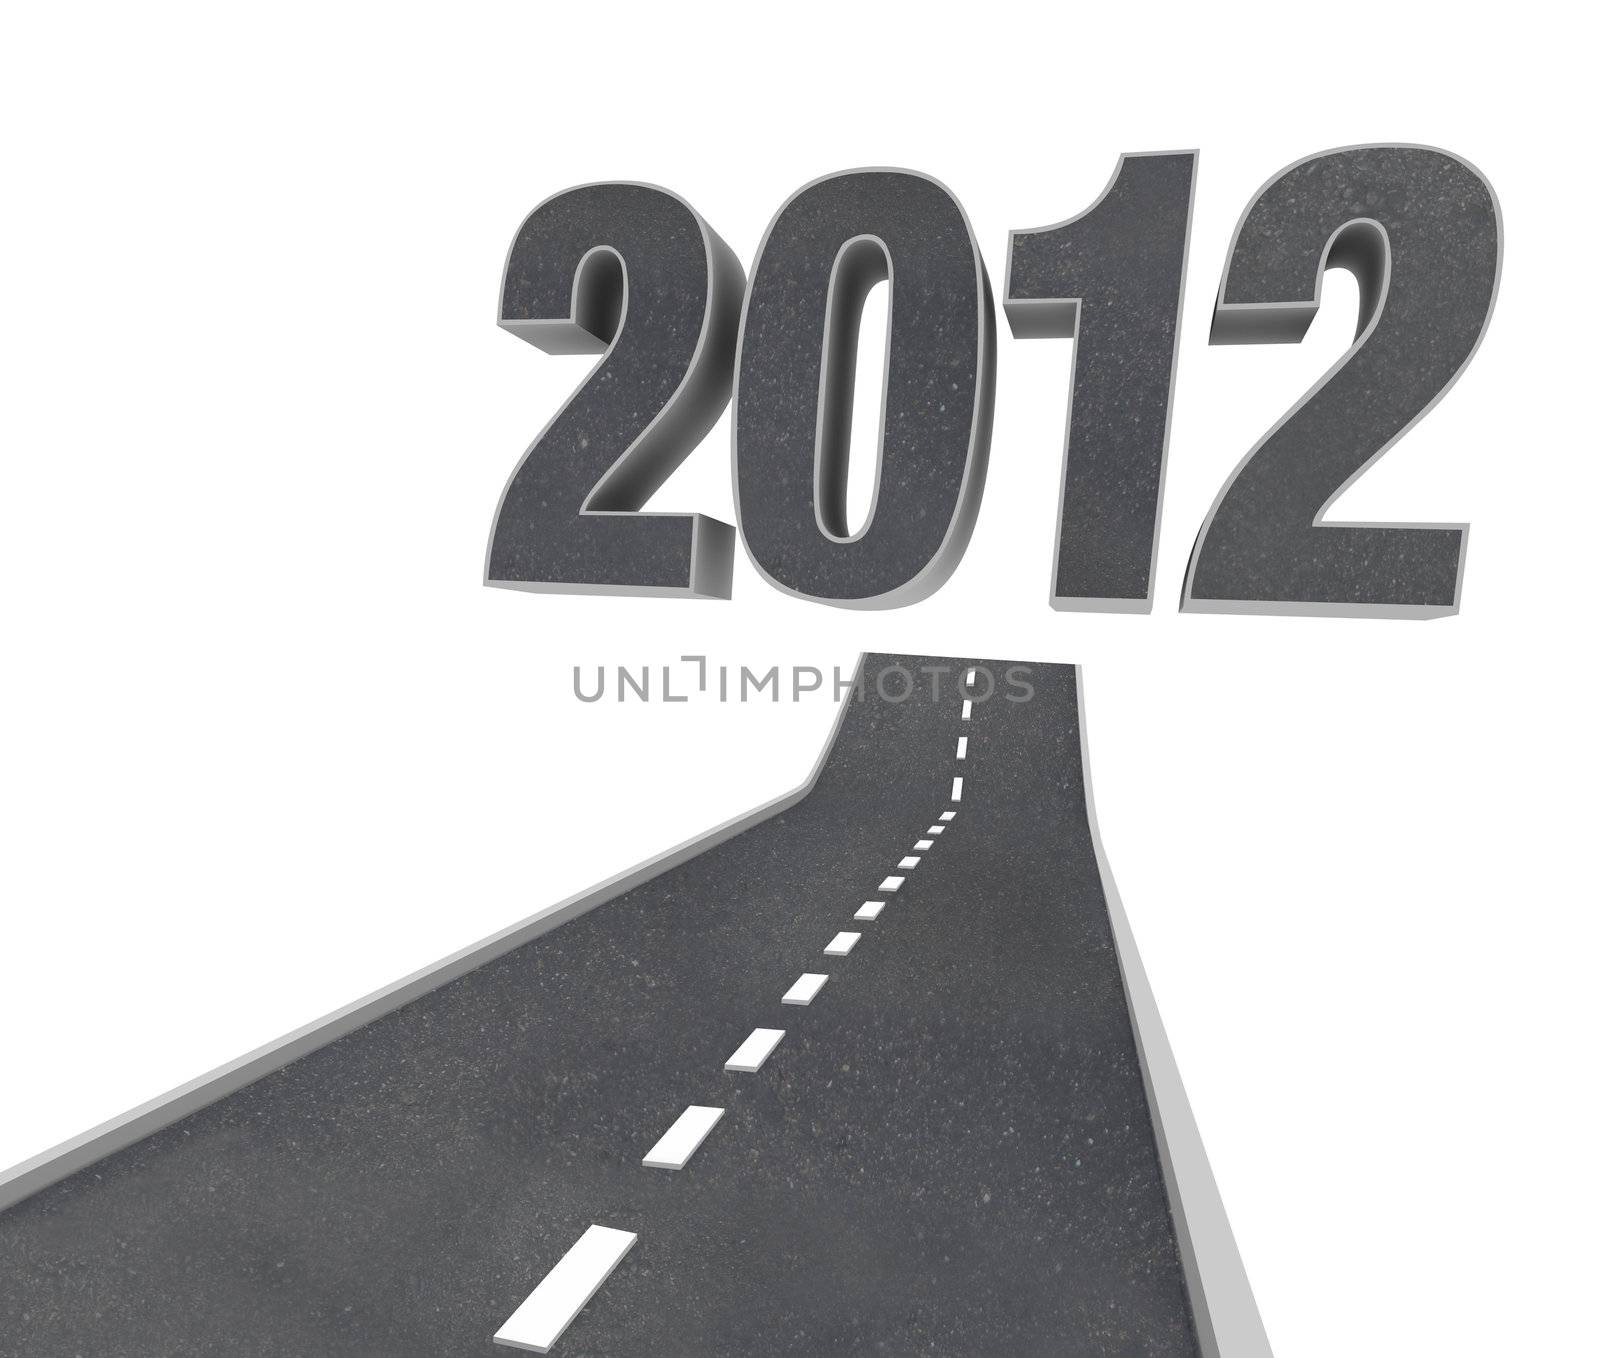 The Road to 2012, a black asphalt pavement street arcs forward and upward to point to the numbers of the year, representing the future new year